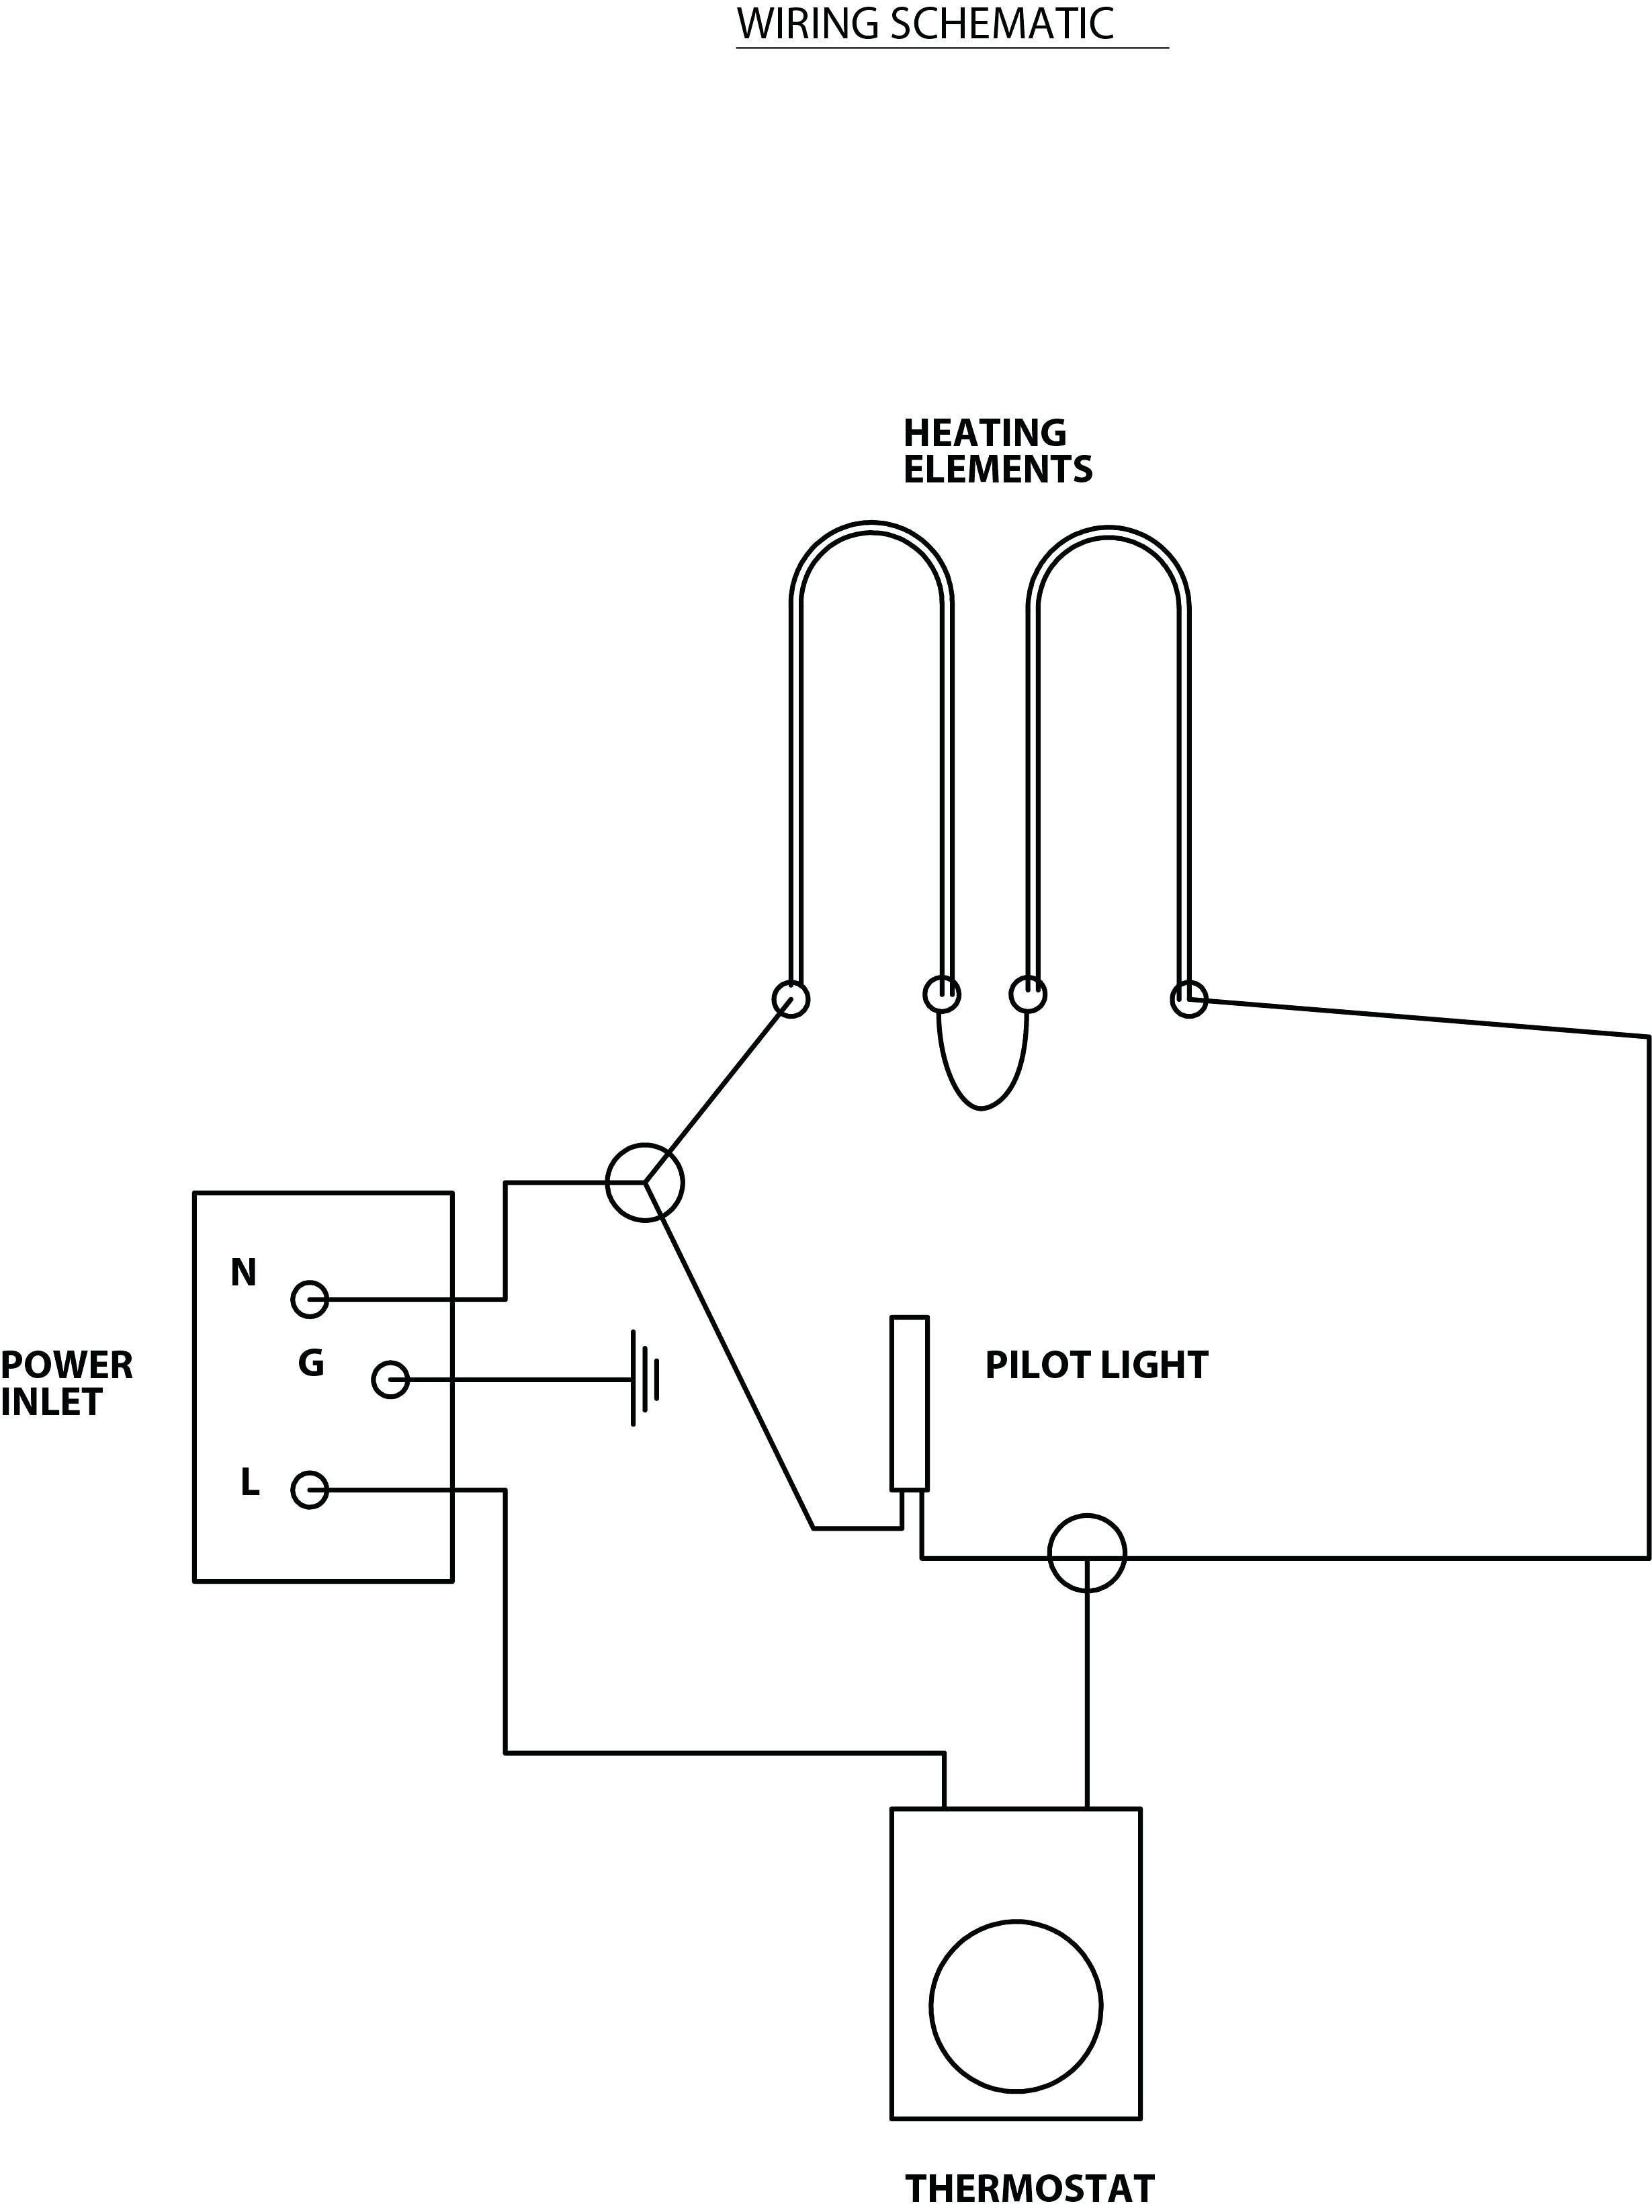 7 wire thermostat wiring diagram for wiring diagram databasemarley thermostat wiring diagram